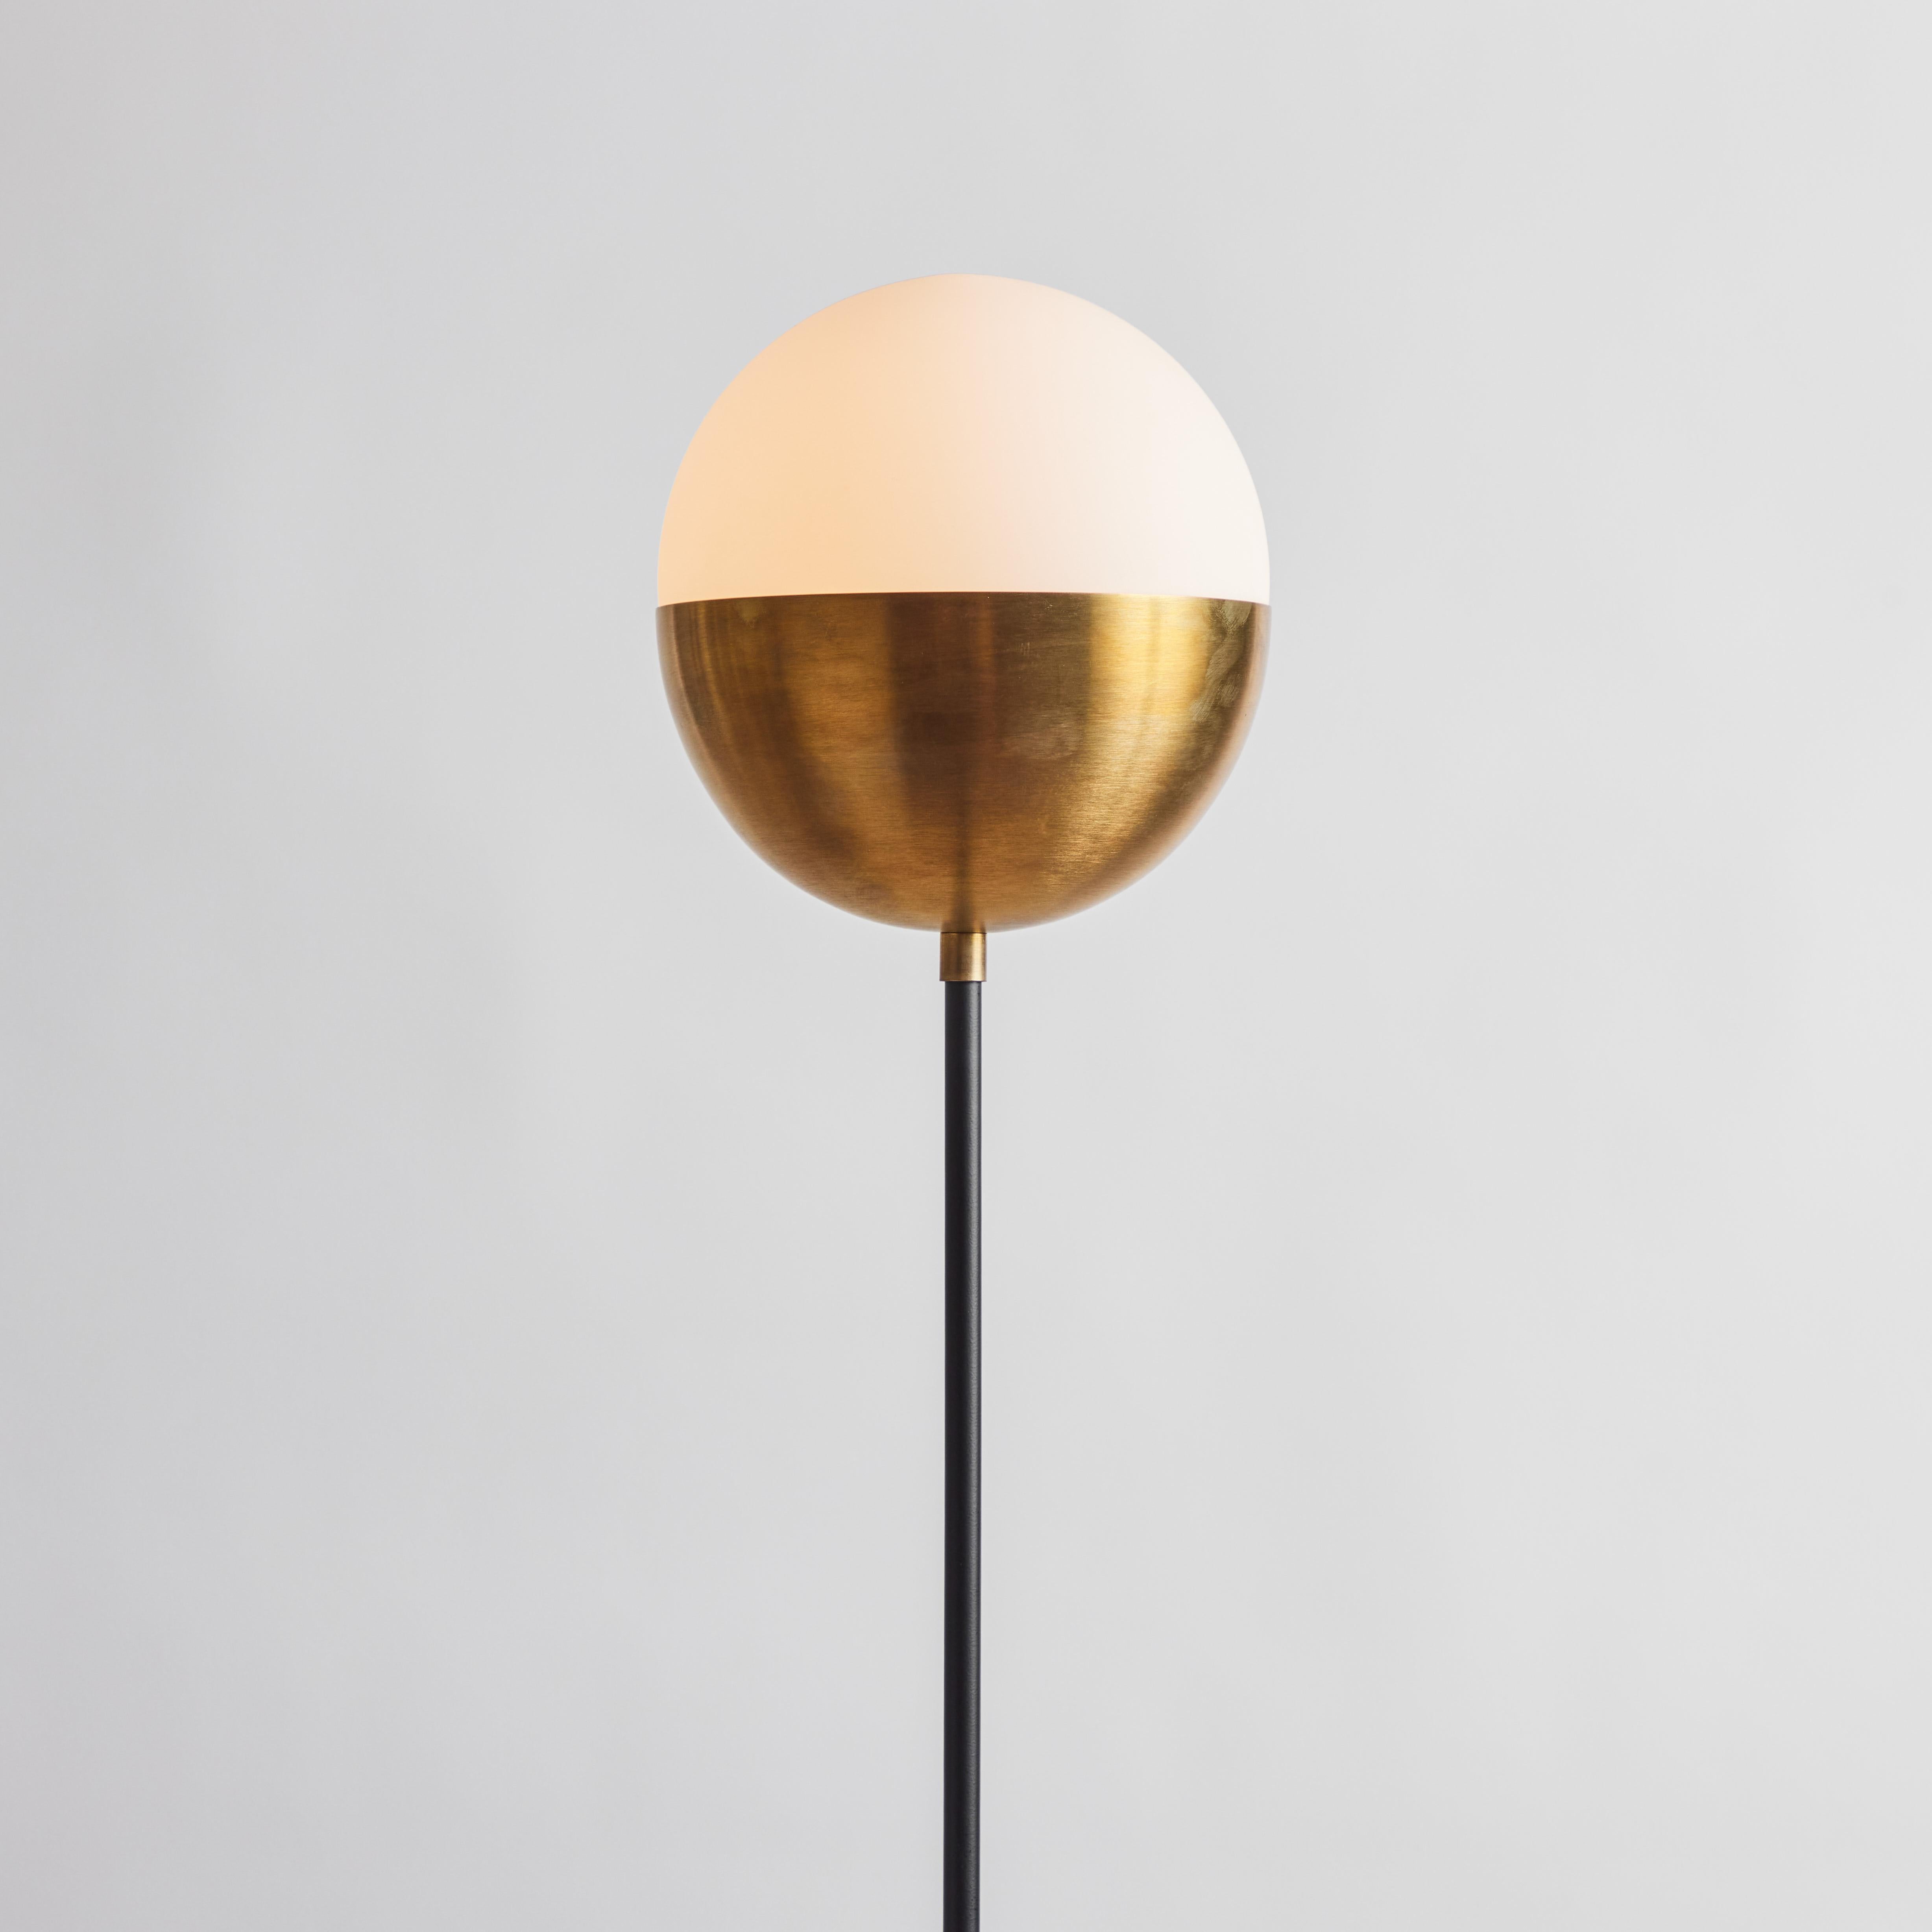 'KOKO' floor lamp in opaline glass & brass by Alvaro Benitez. 

Hand-fabricated by Los Angeles based designer and lighting professional Alvaro Benitez, this highly refined floor lamp is reminiscent of the iconic midcentury Italian designs of